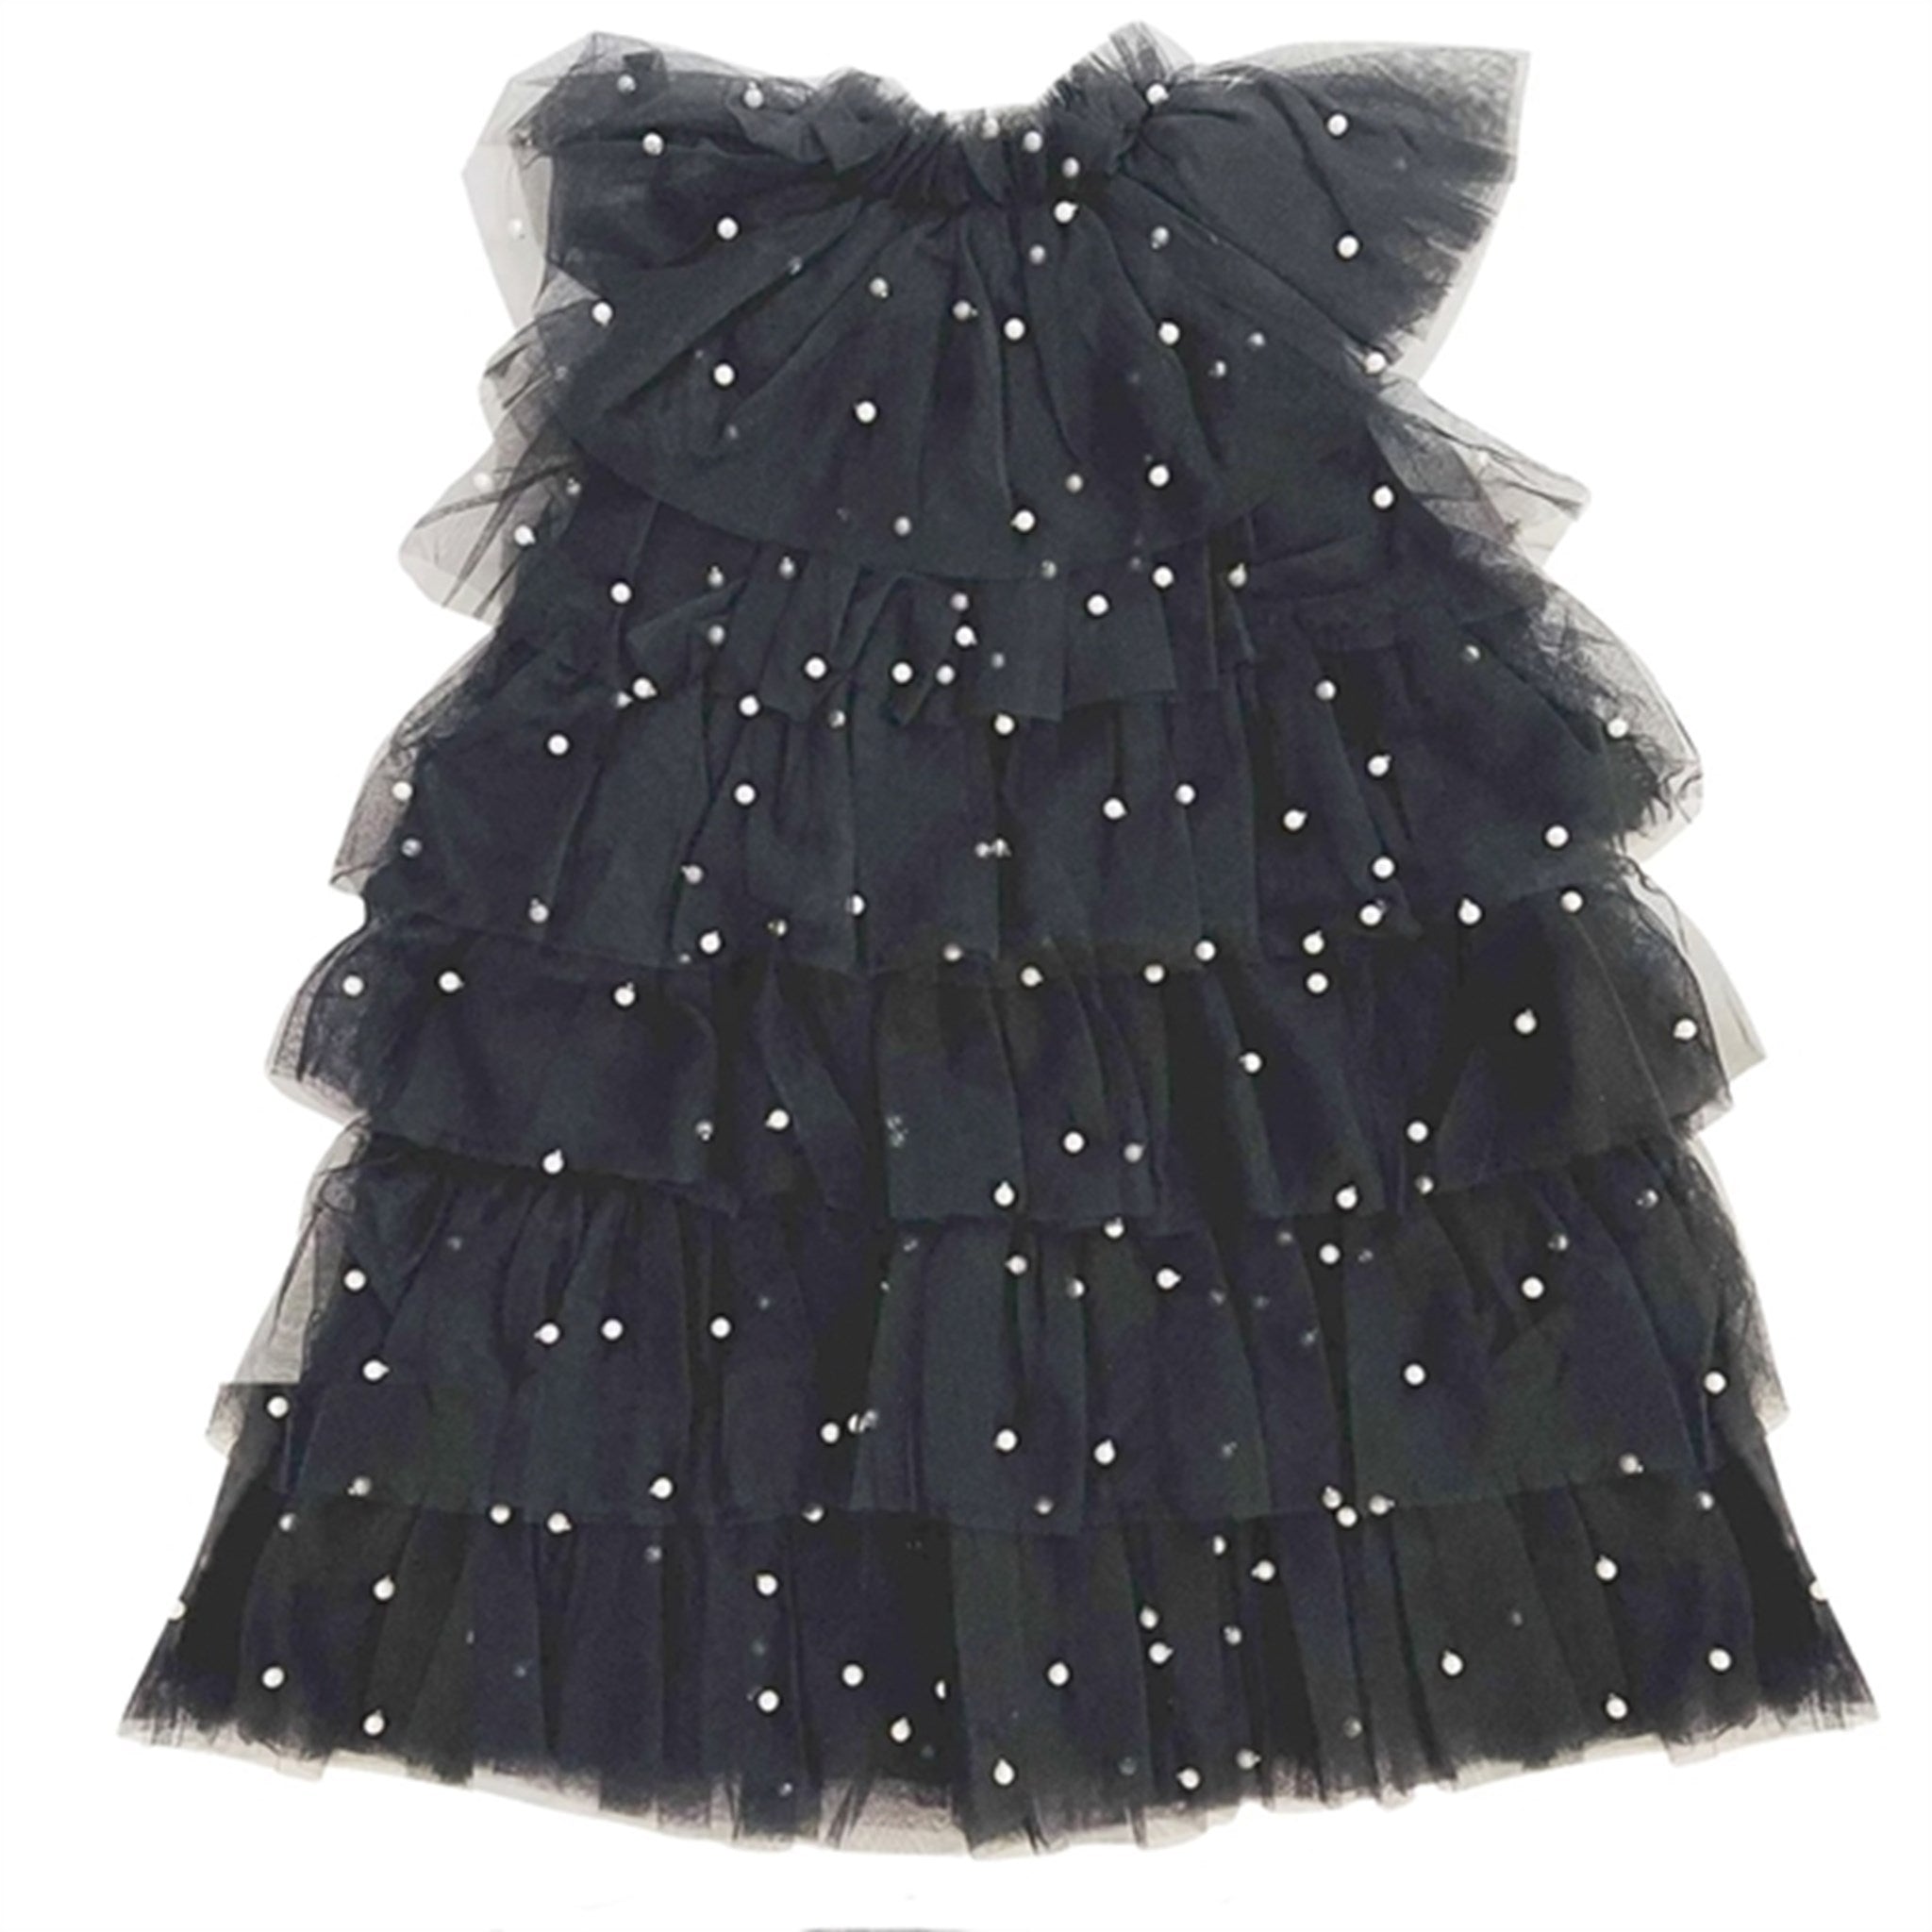 Dolly by Le Petit Tom Pearl Tutully Tiered Tulle Tuttu Kjole Black